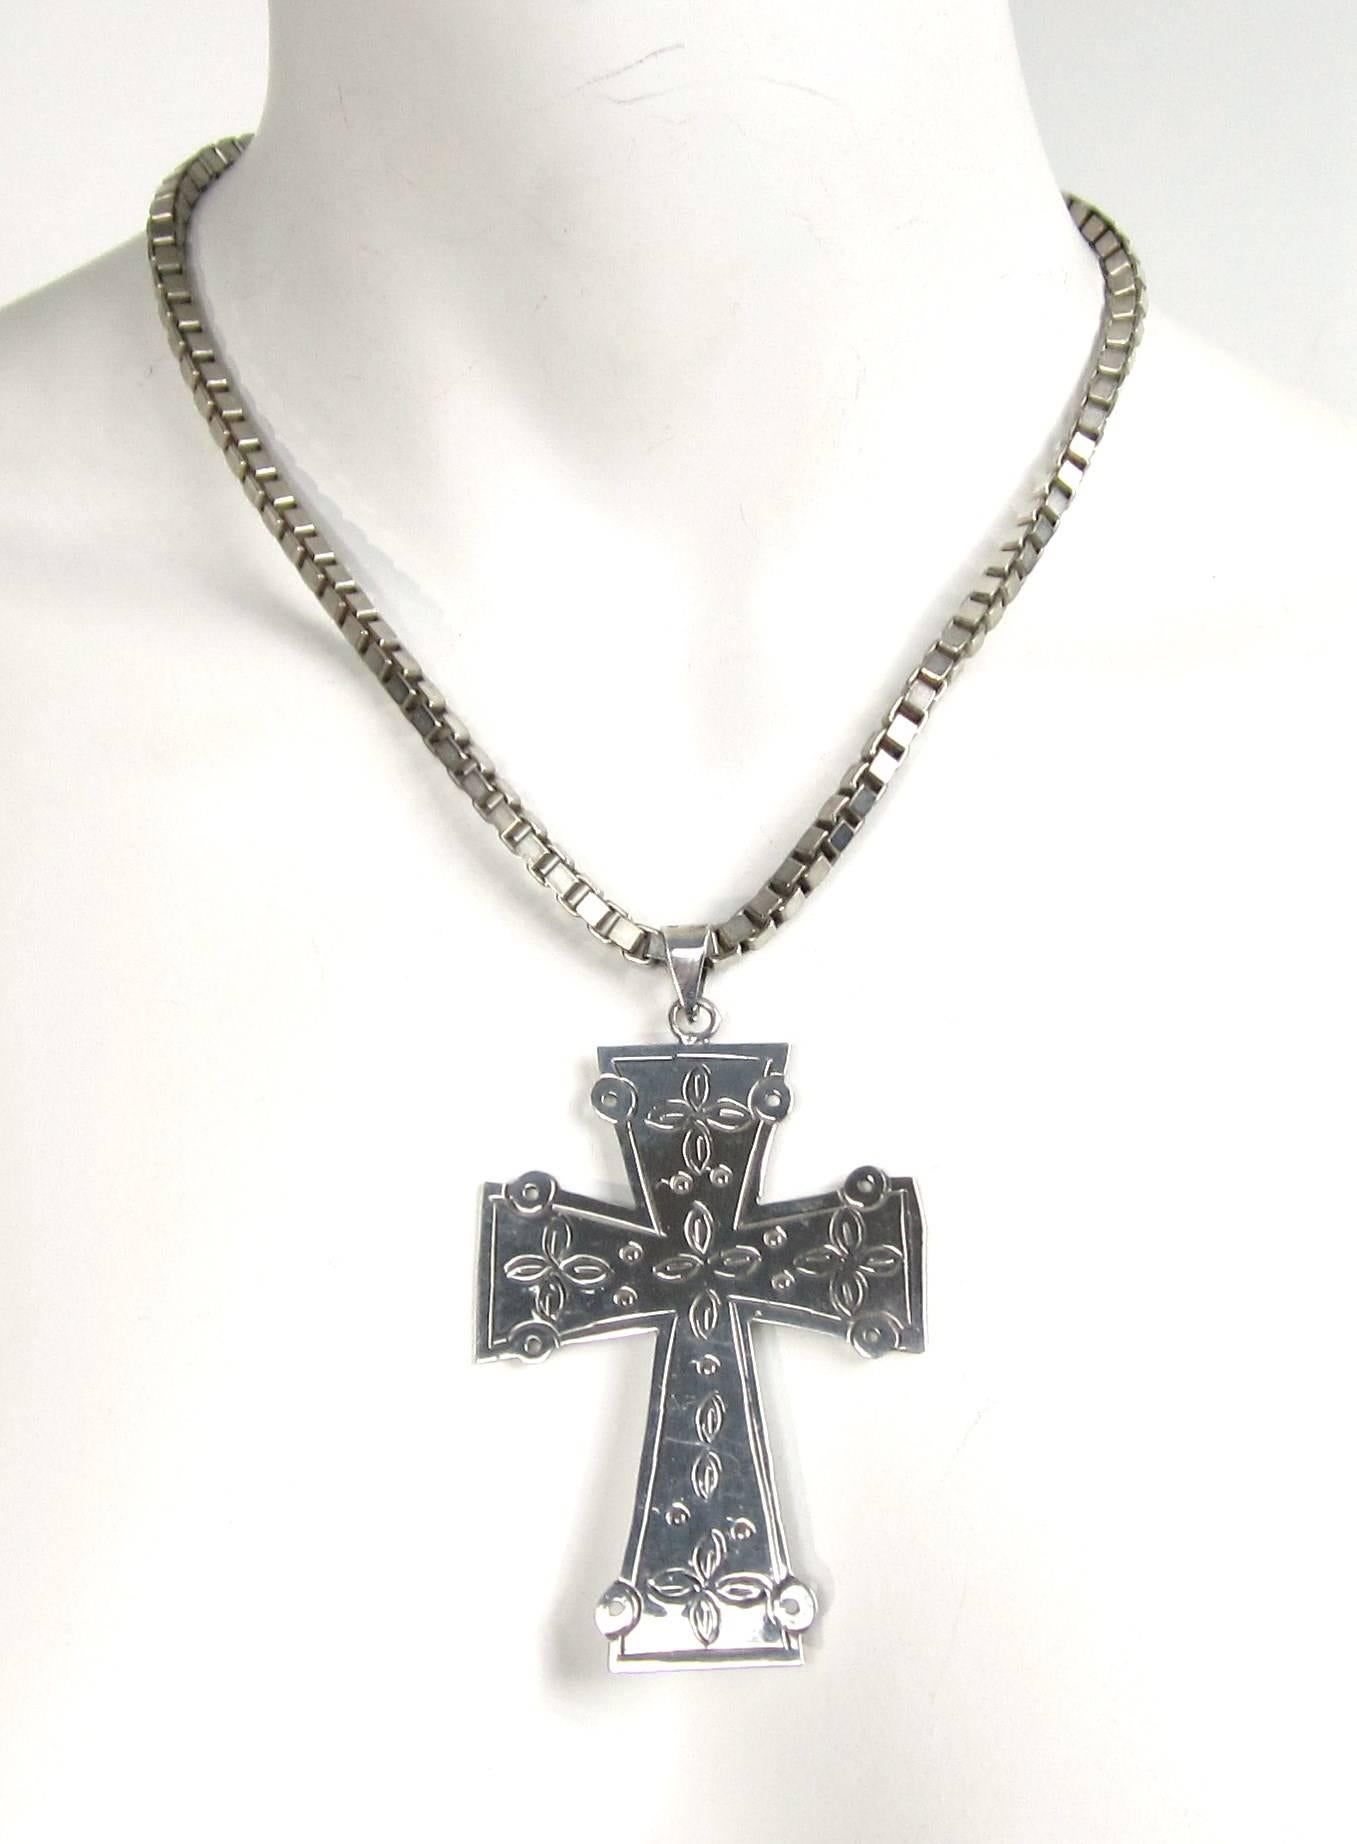  This is a large sterling silver cross with wonderful cut outs. Hallmarked on the back- Measures 2.95 inches  x 2.13 inches. There is a large bale to accommodate a large chain. Attached is a large Sterling Silver box Chain measuring 18.25 inches end